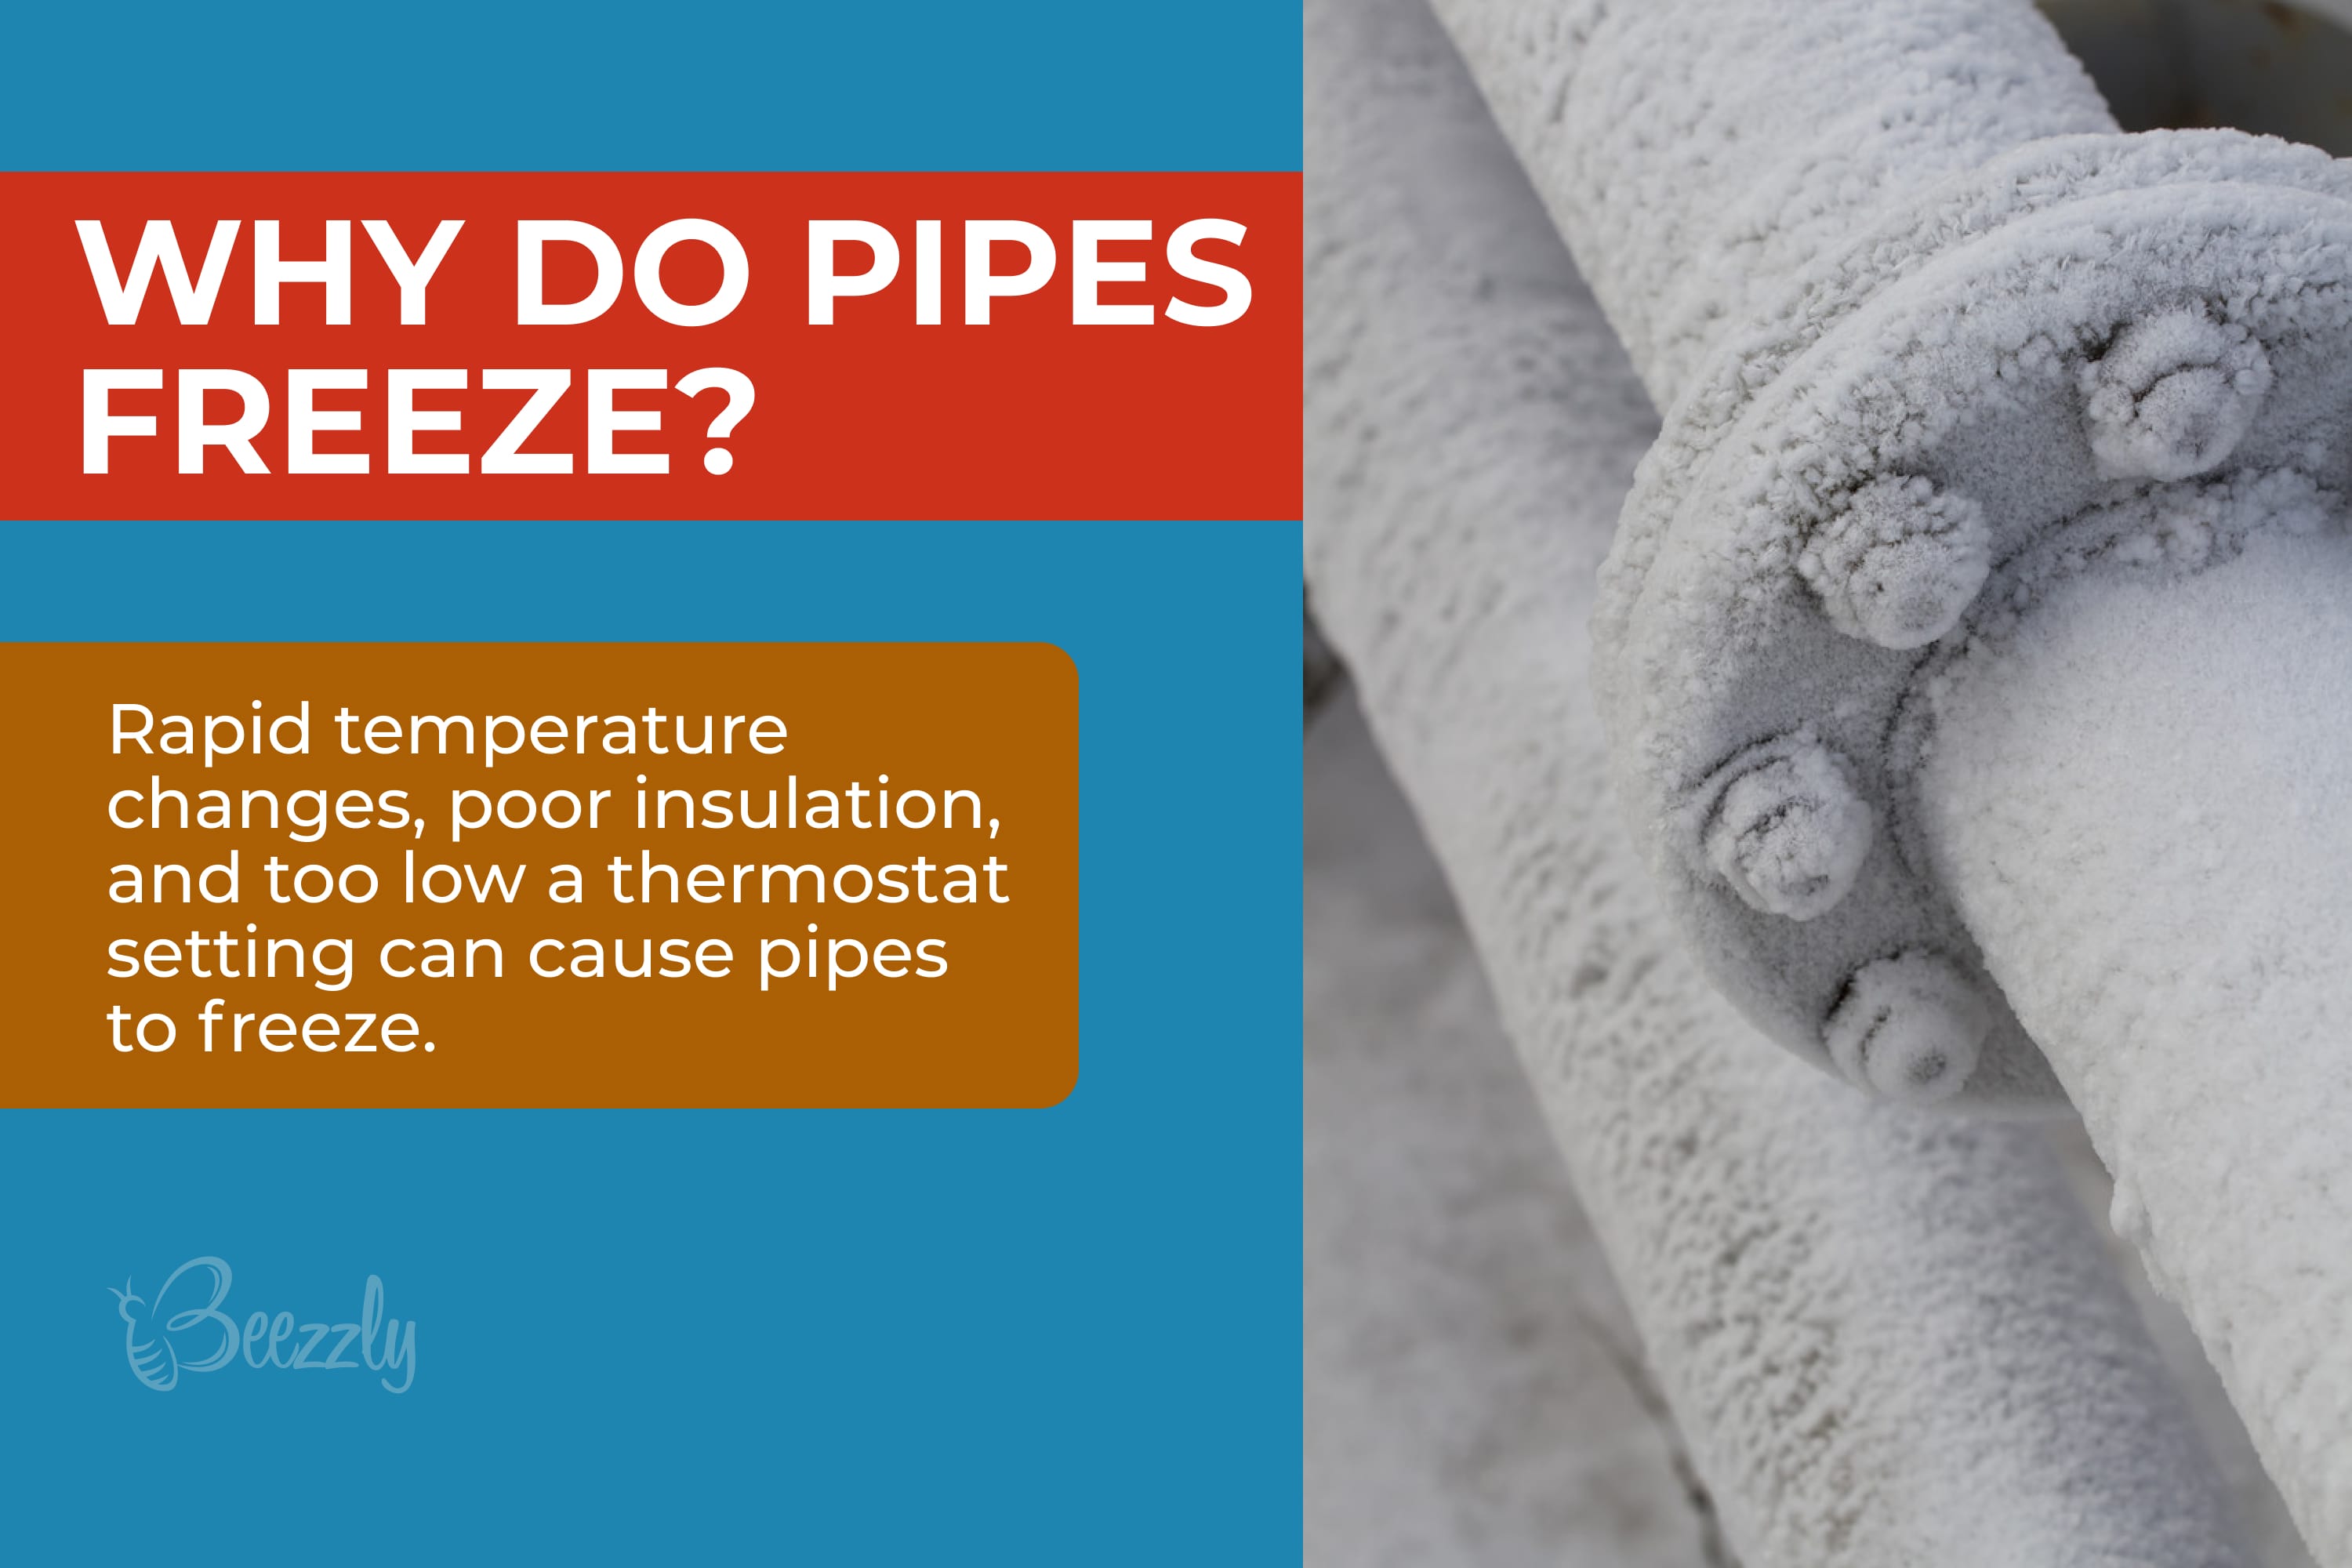 Why do pipes freeze